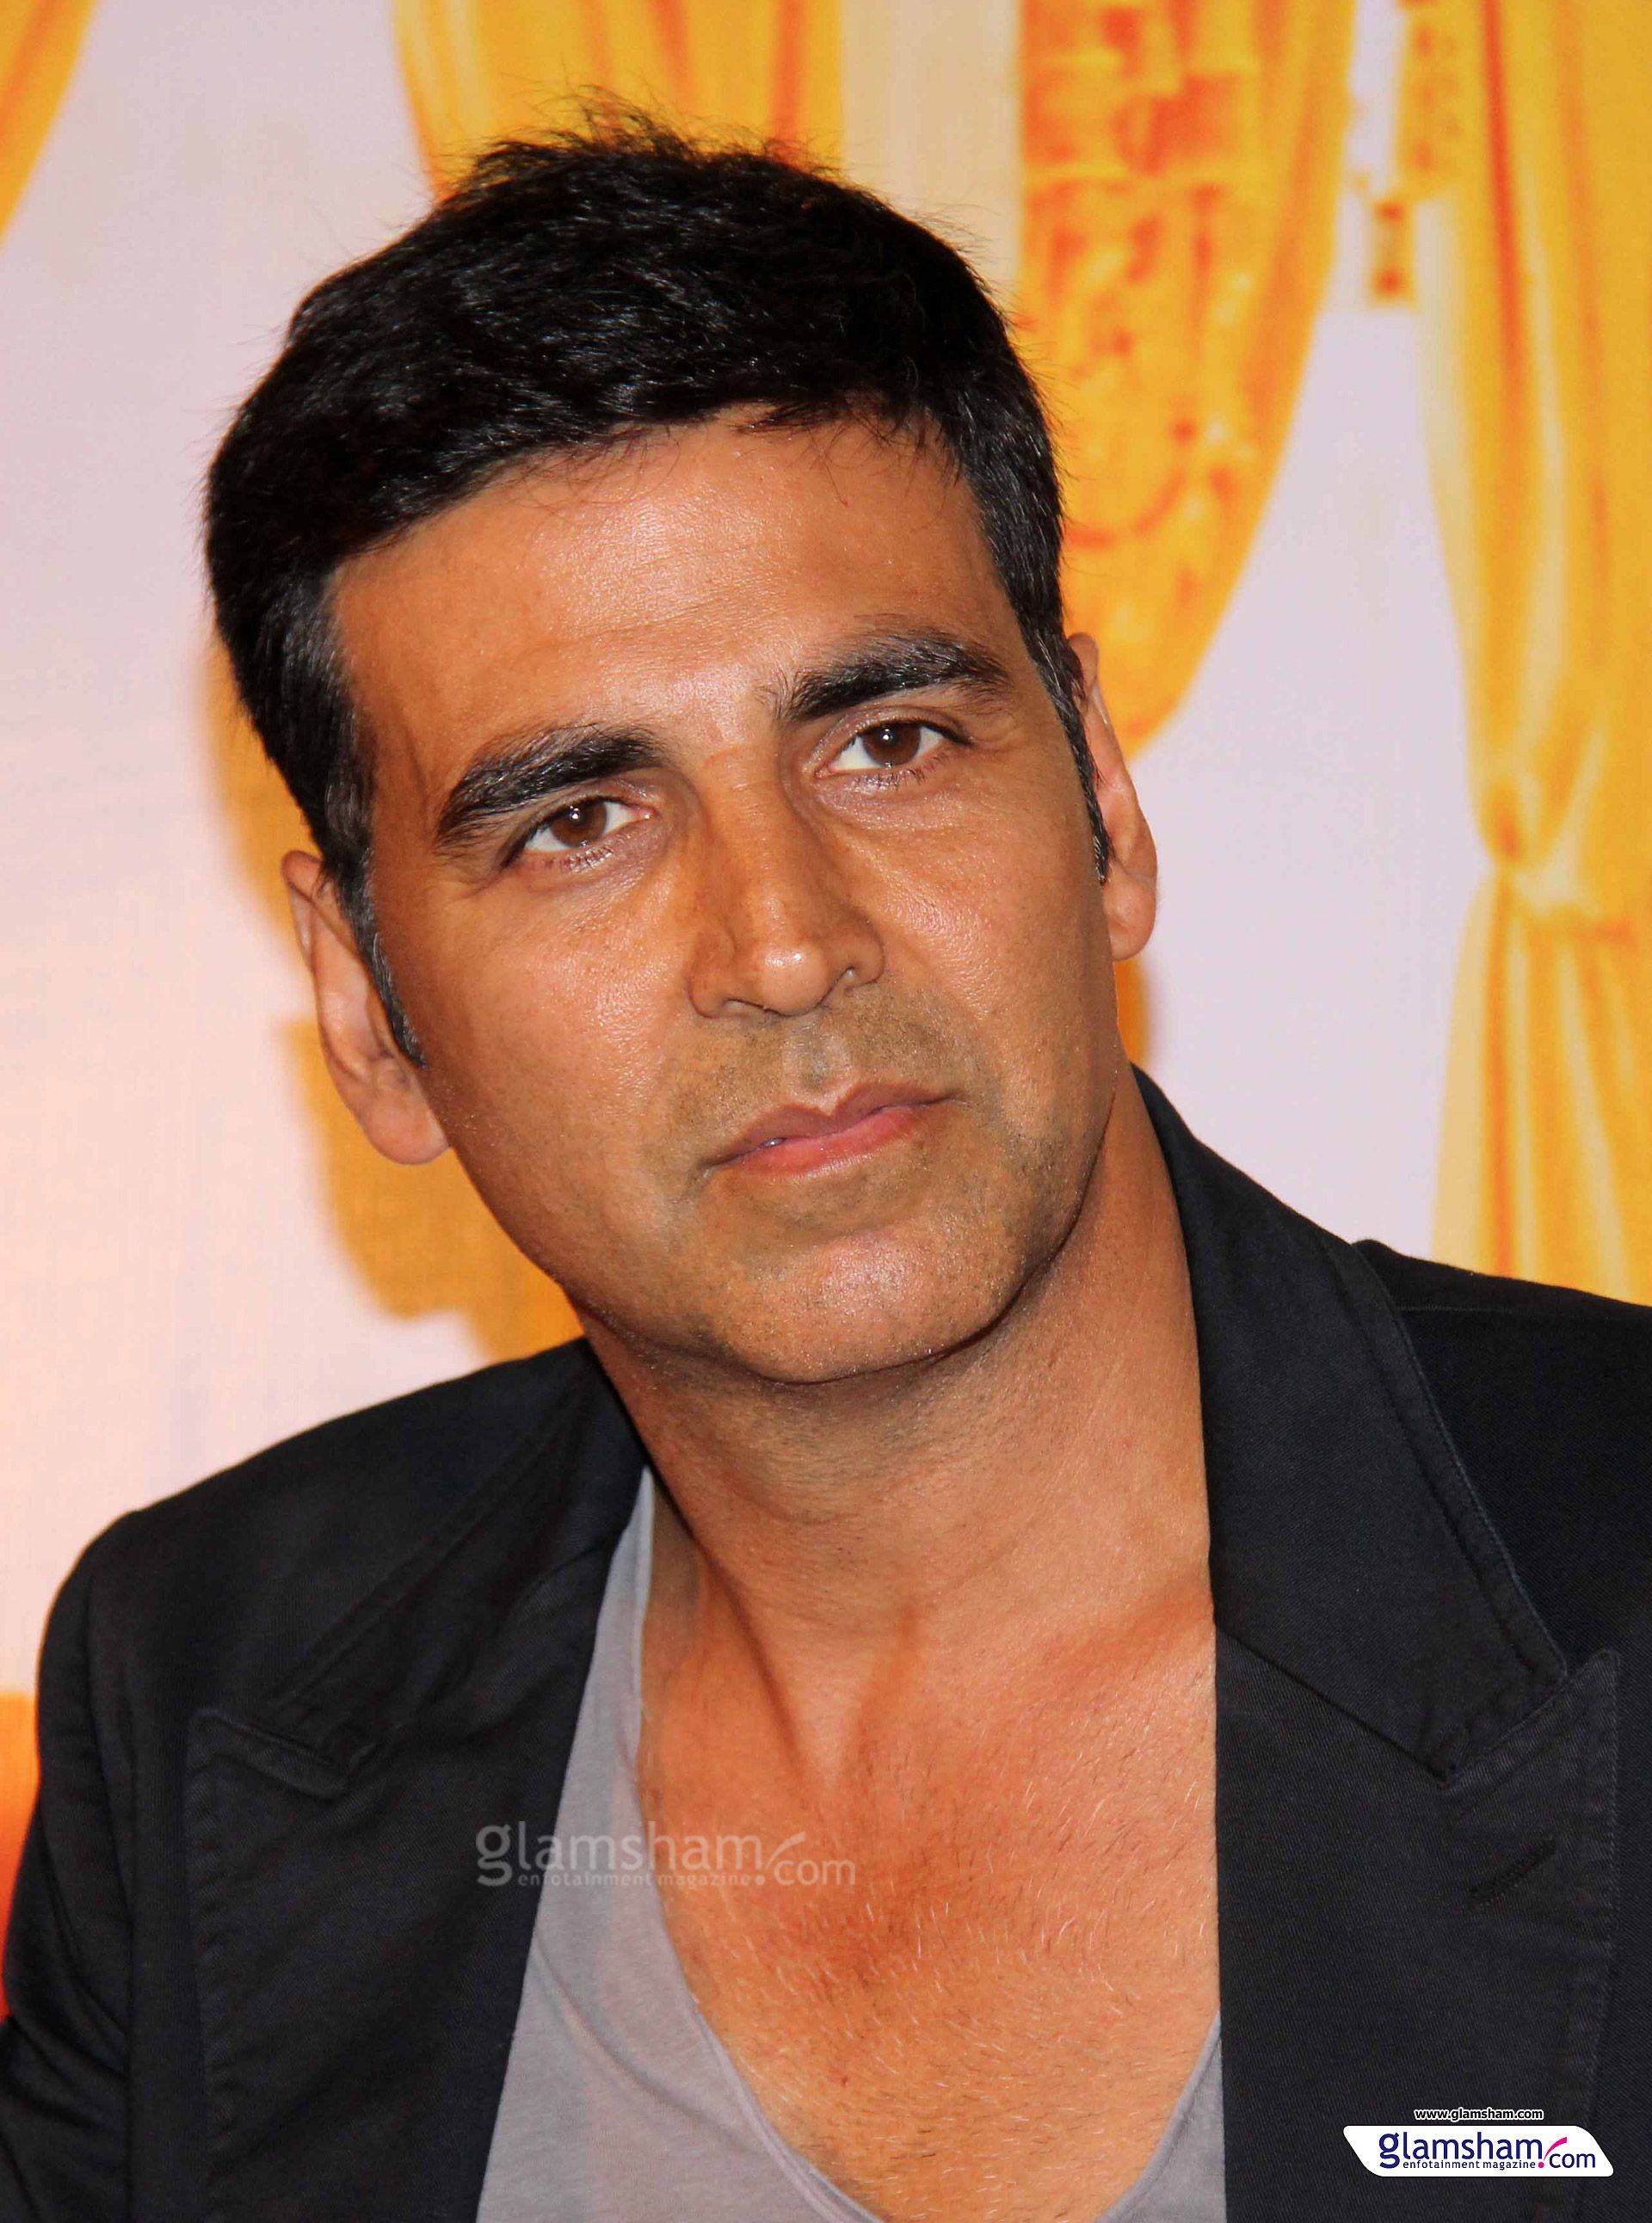 Akshay Kumar picture gallery HD picture # 7 : glamsham.com